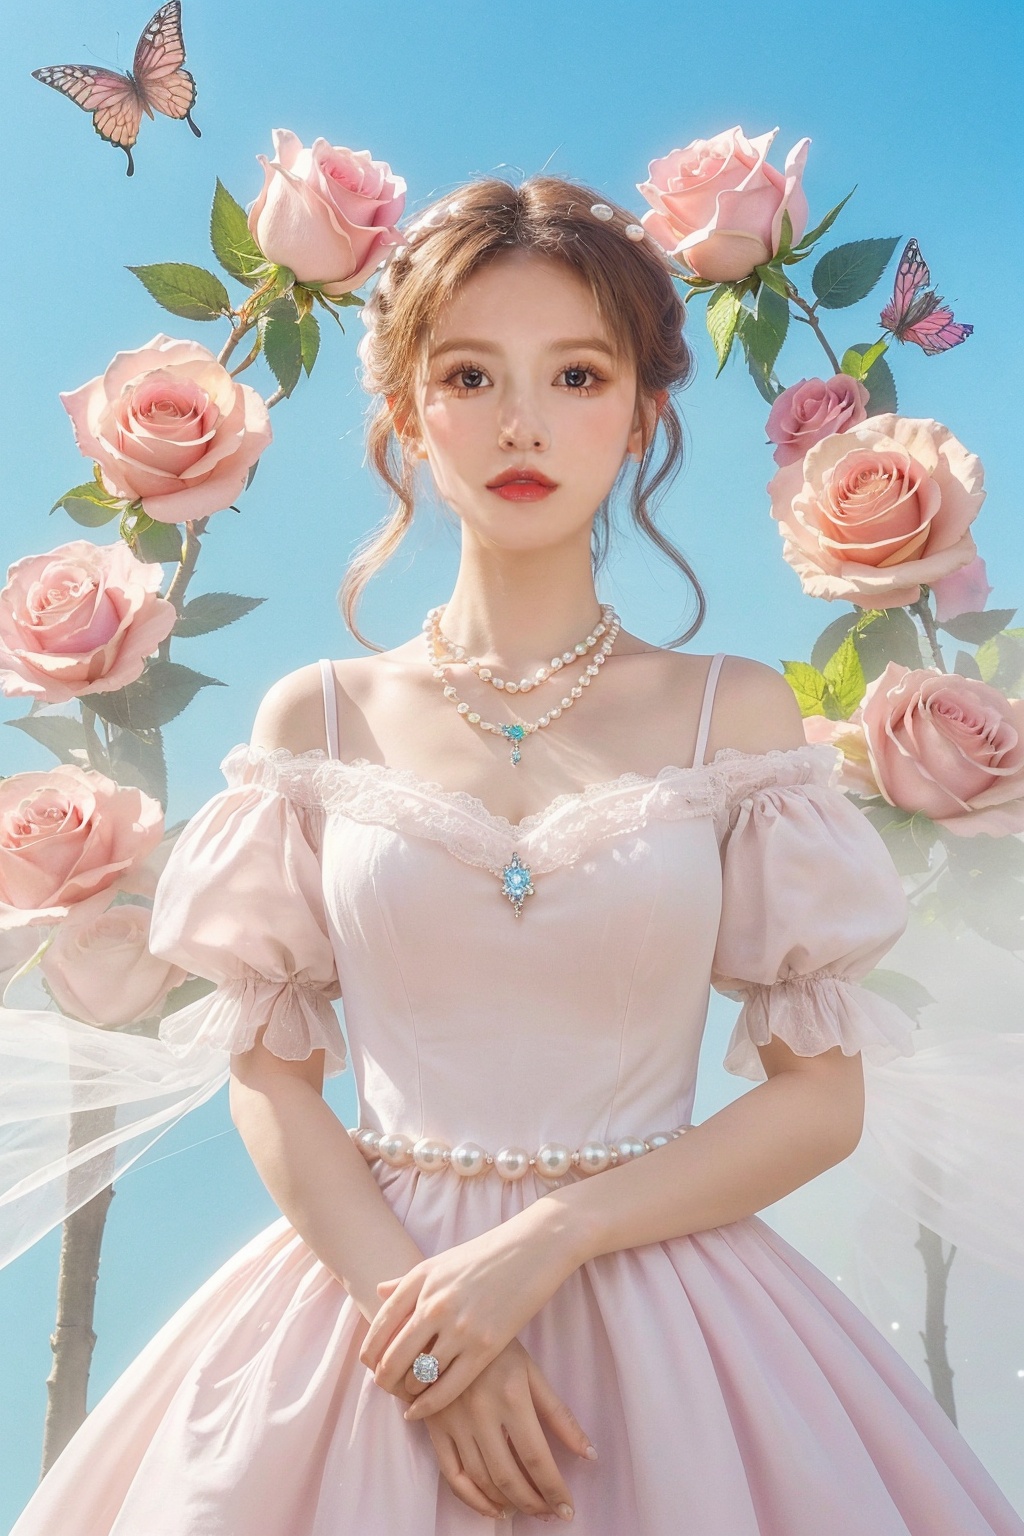 quality,8K,extremely complex details,1girl,lolita,careful eyes,looking_at_viewer,butterfly,gradient art,in the flower cluster,(rose:1.1),sky,(white cloud:0.9),full_shot,necklace,pearls and jewels,<lora:花开富贵_1 _1+1+1+1+1+1+1+1+0+0+0+1+1+1+1+1+1:1>,